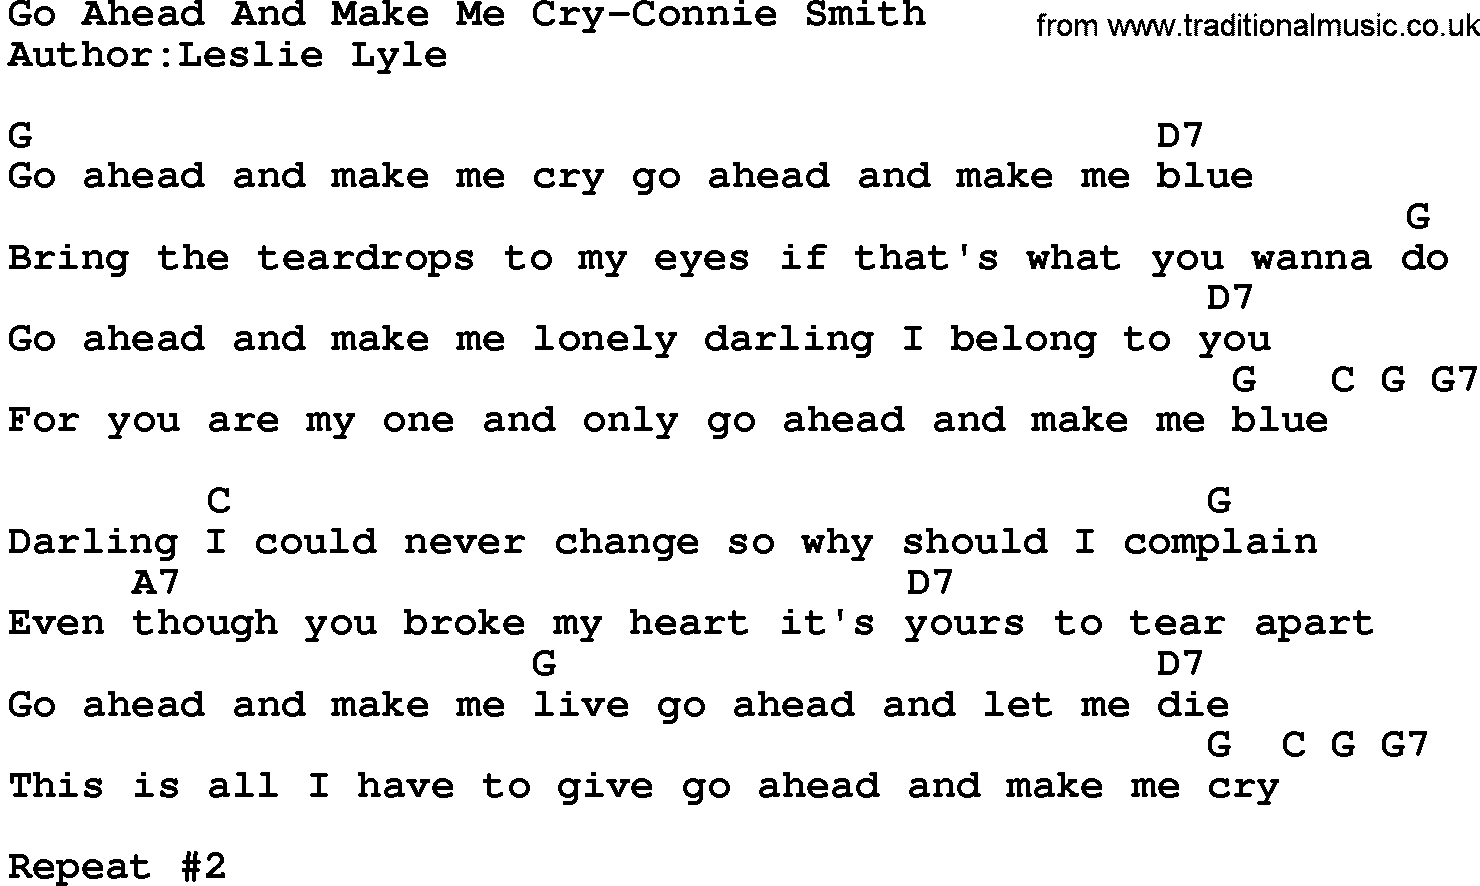 Country music song: Go Ahead And Make Me Cry-Connie Smith lyrics and chords